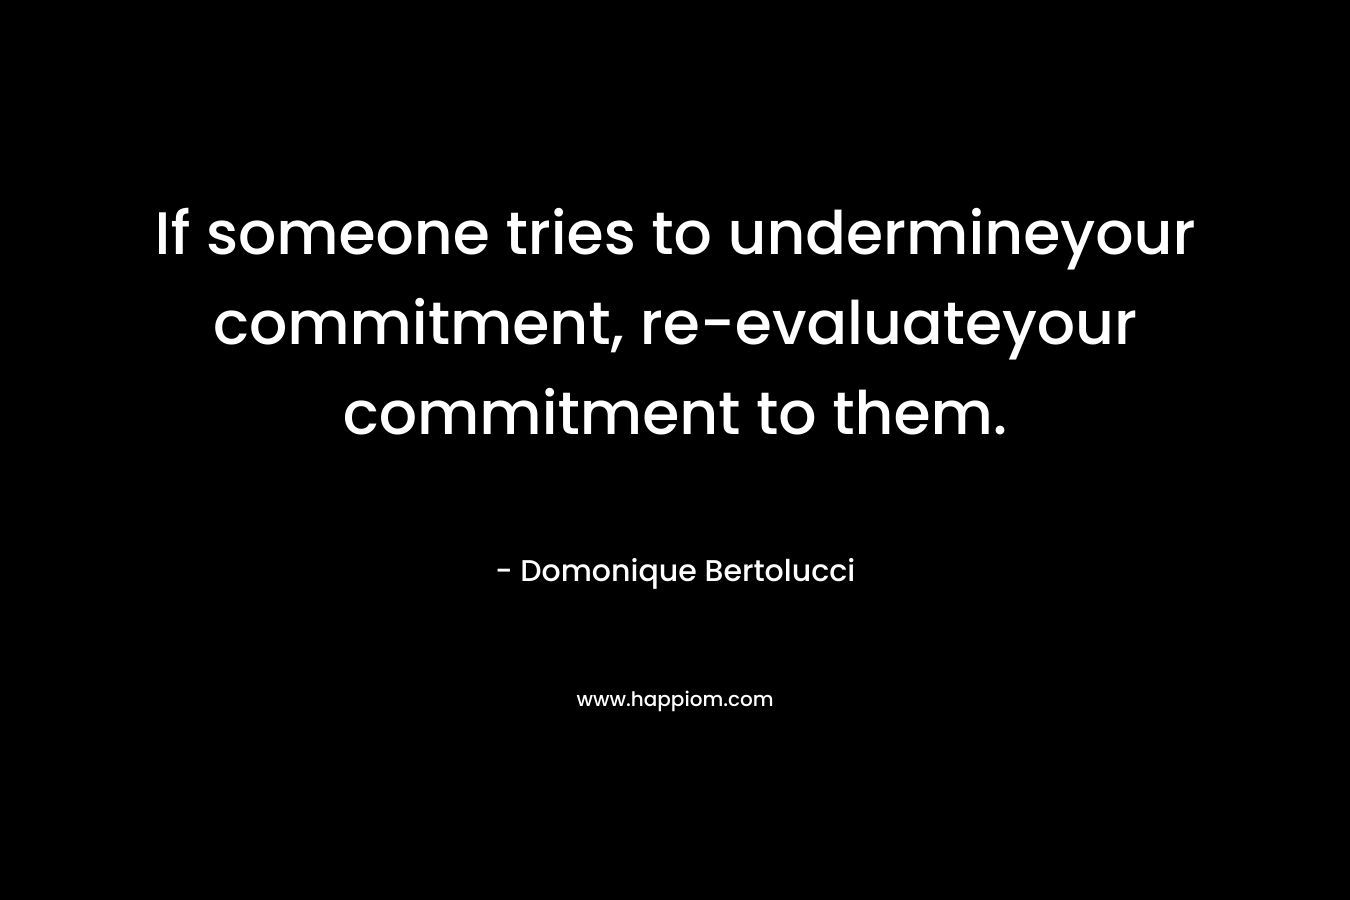 If someone tries to undermineyour commitment, re-evaluateyour commitment to them. – Domonique Bertolucci